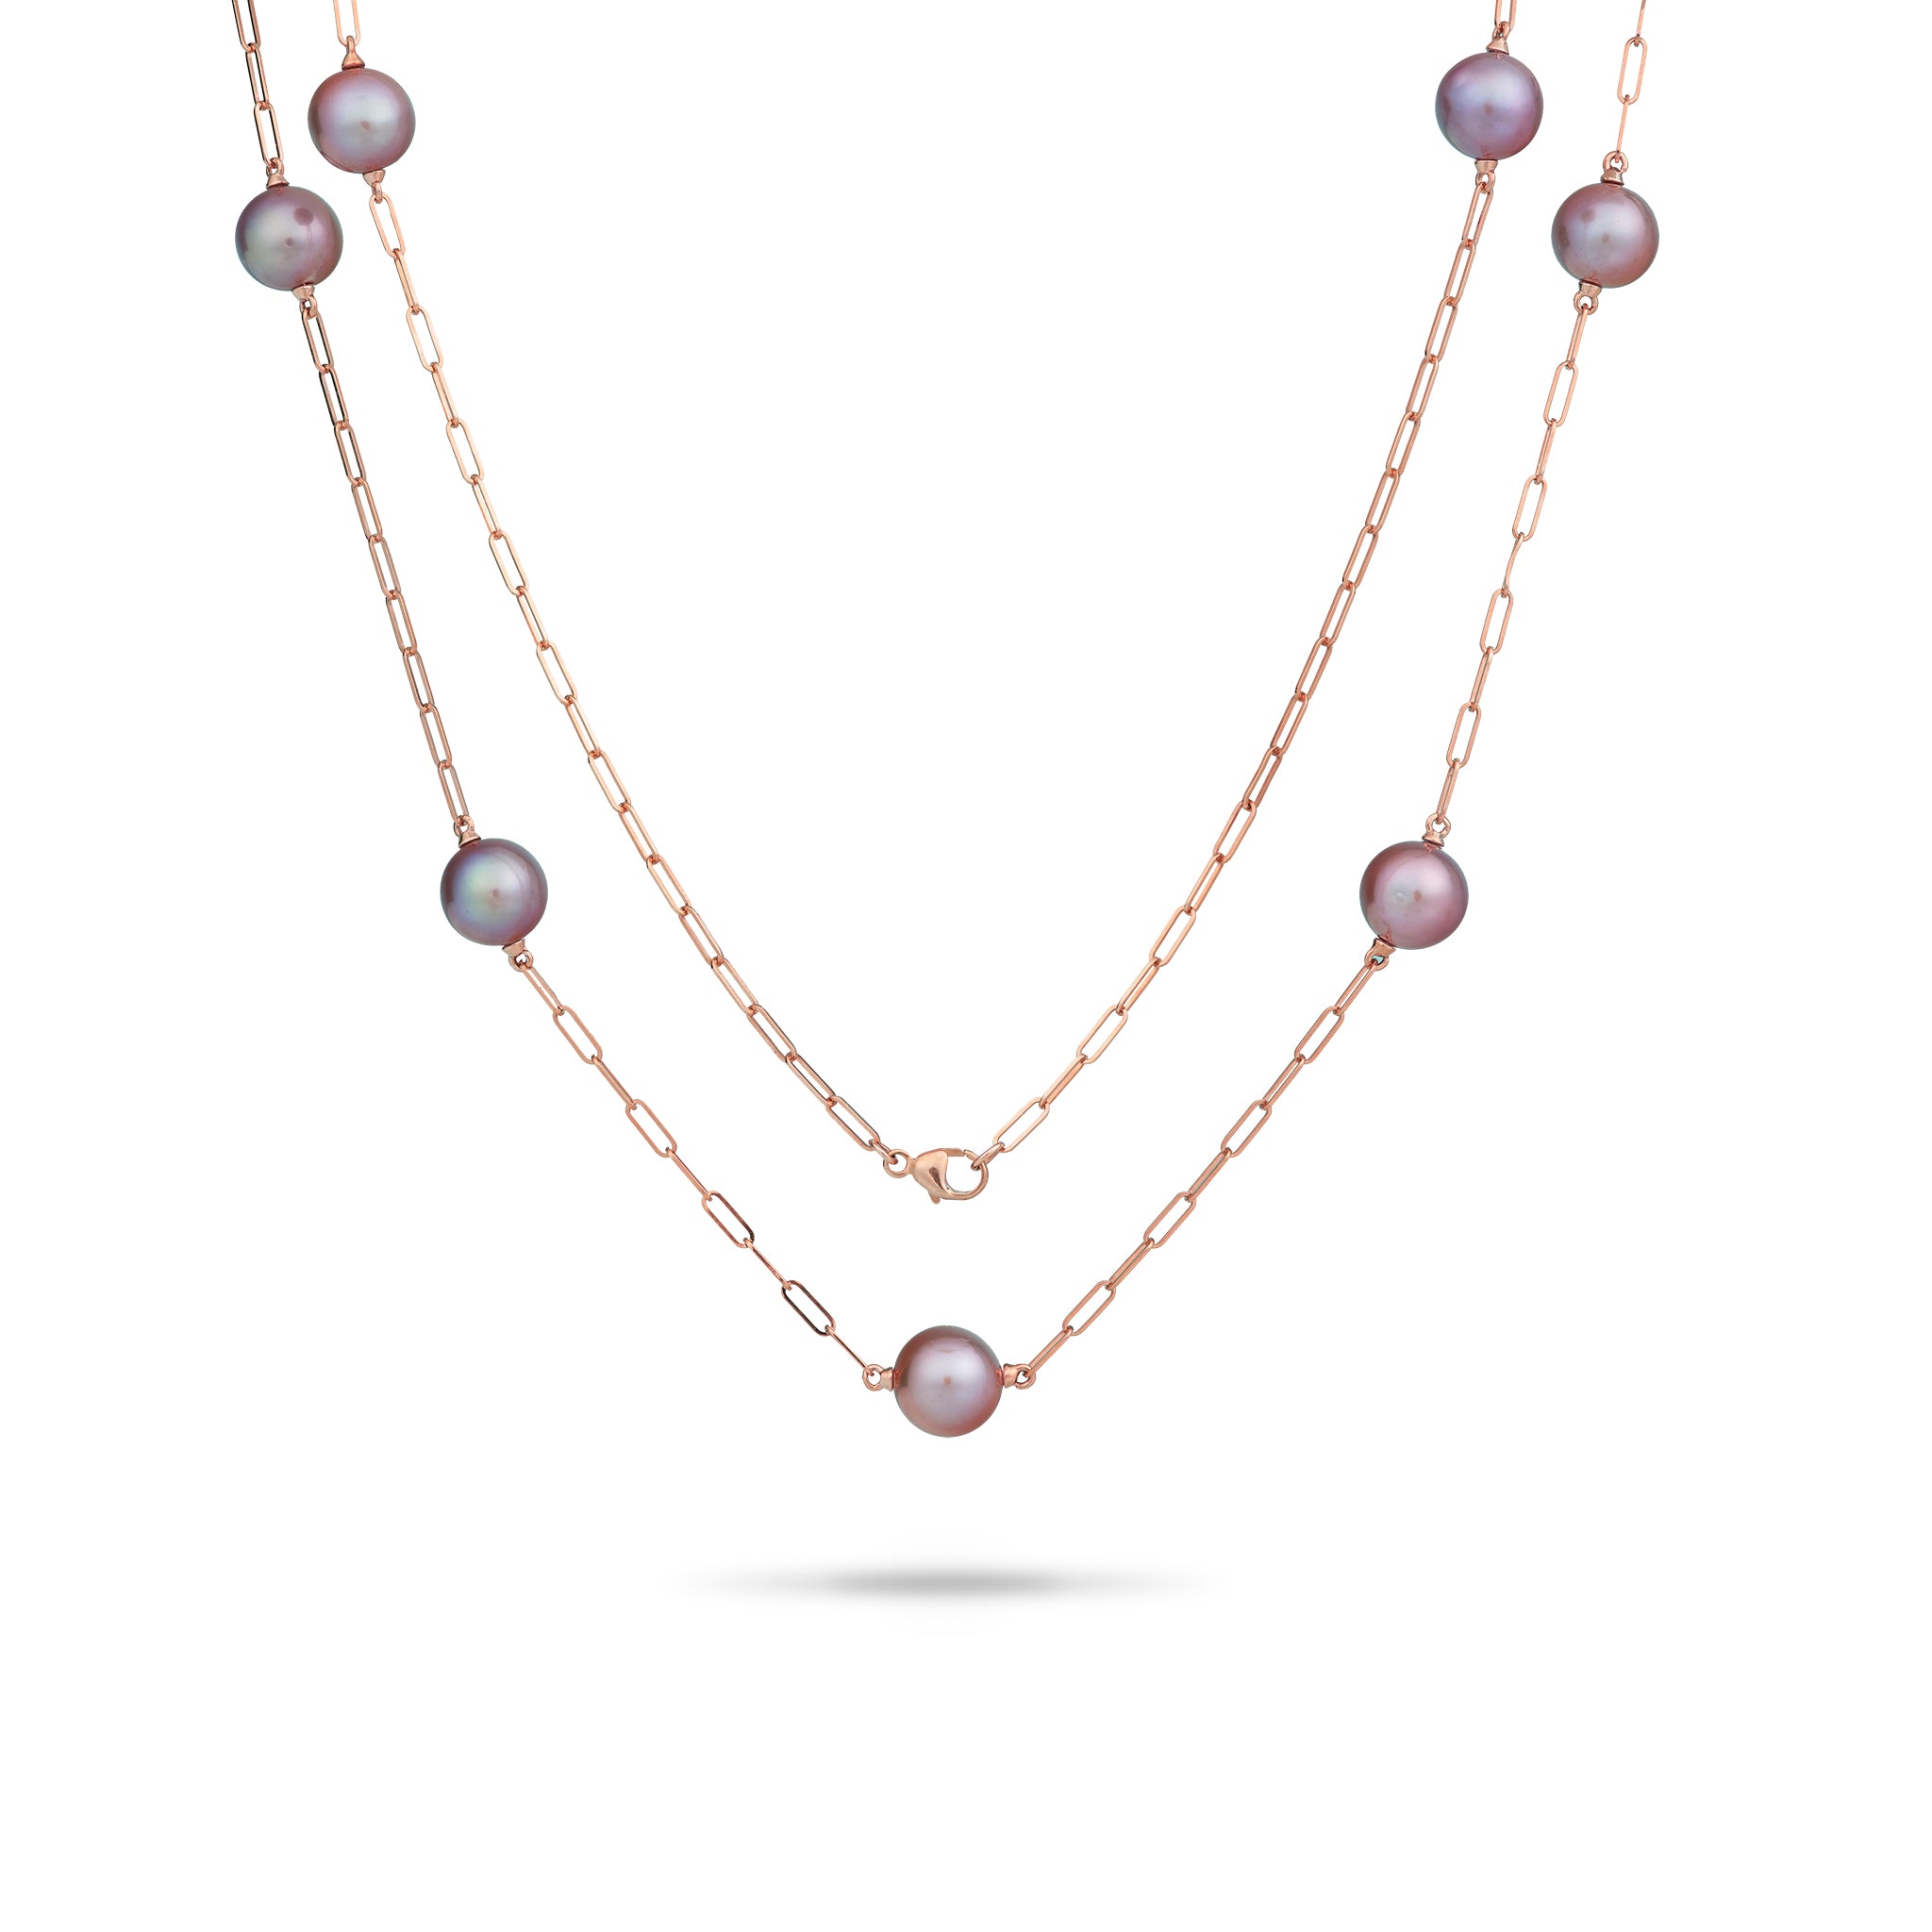 Adjustable 24" Ultraviolet Freshwater Pearl Paperclip Chain Necklace in Rose Gold